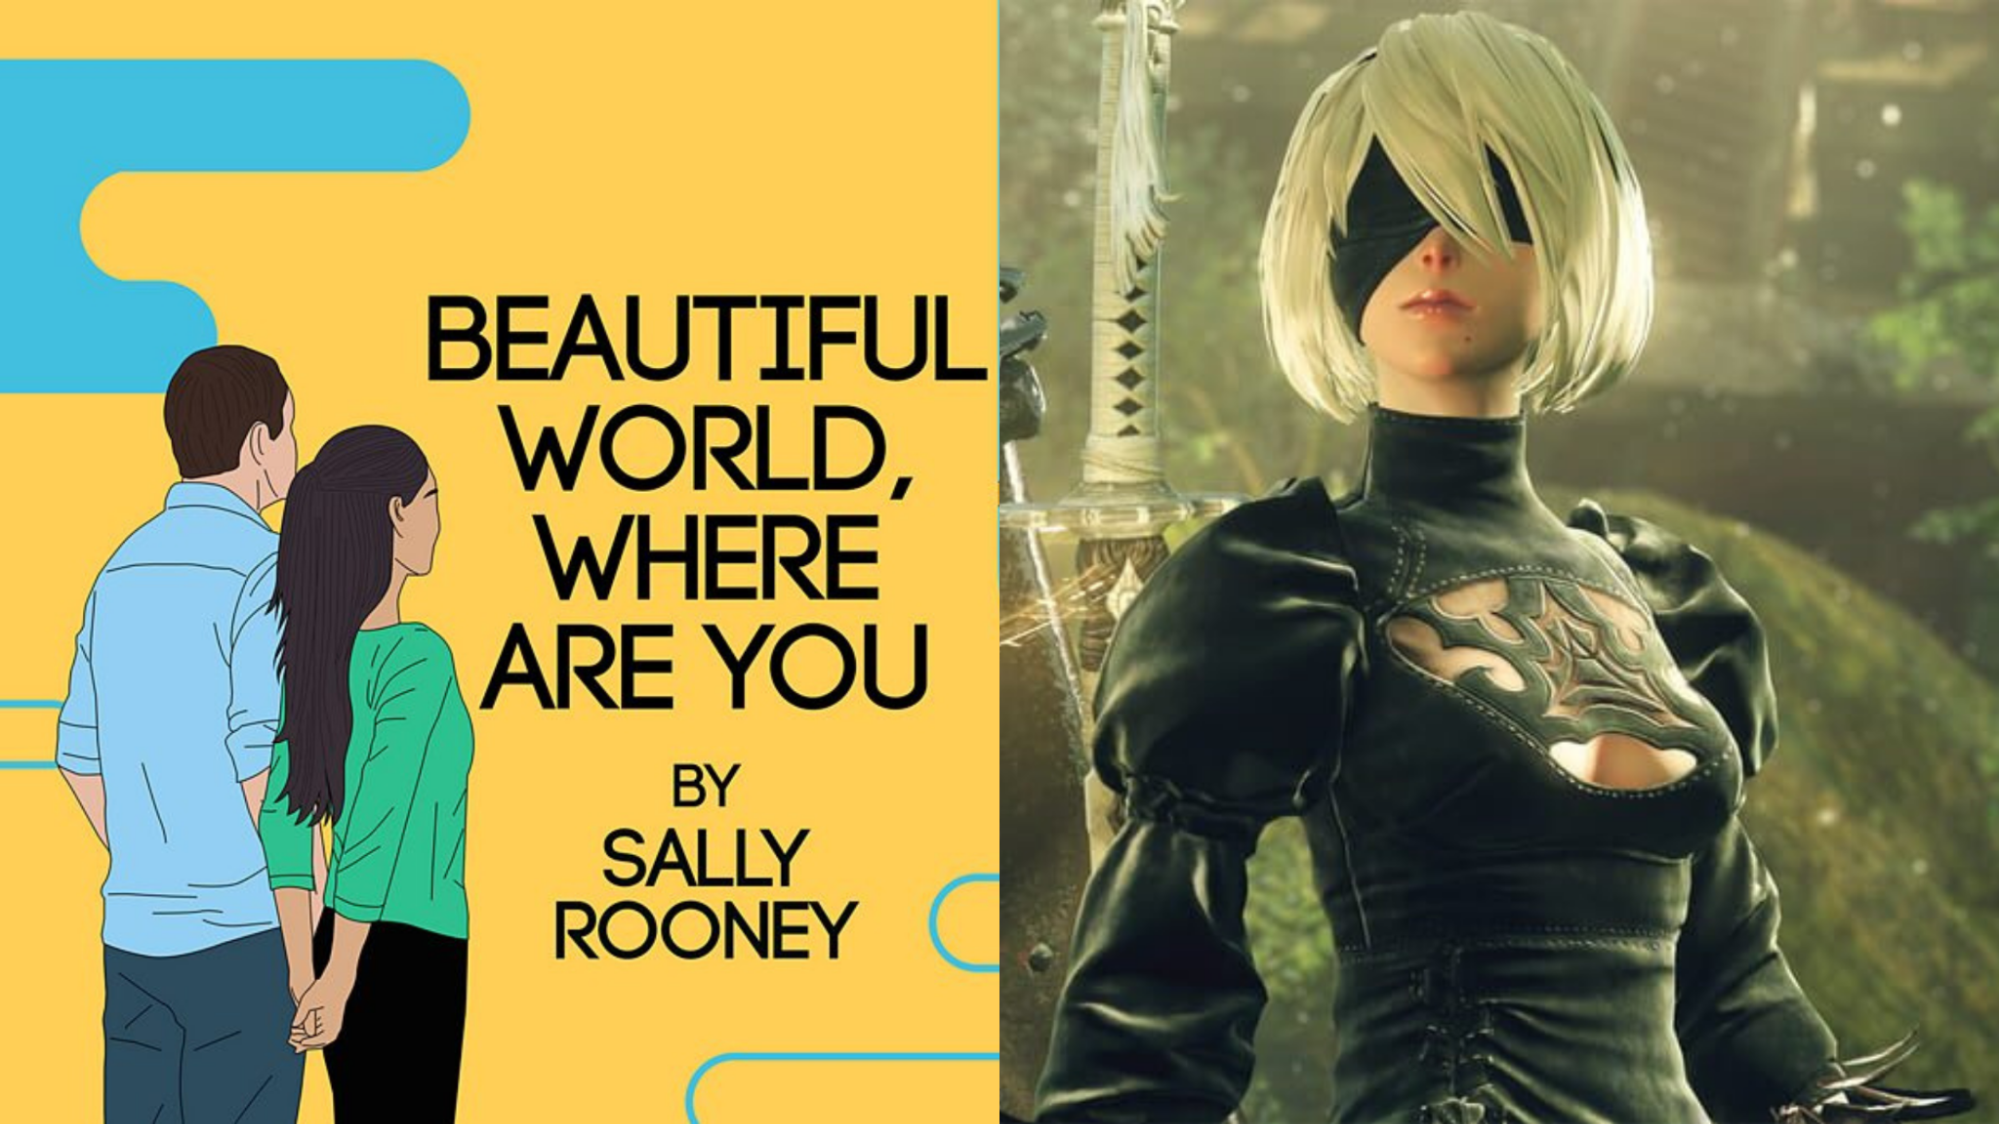 Image for Searching for Meaning in Nier Automata and Beautiful World, Where Are You